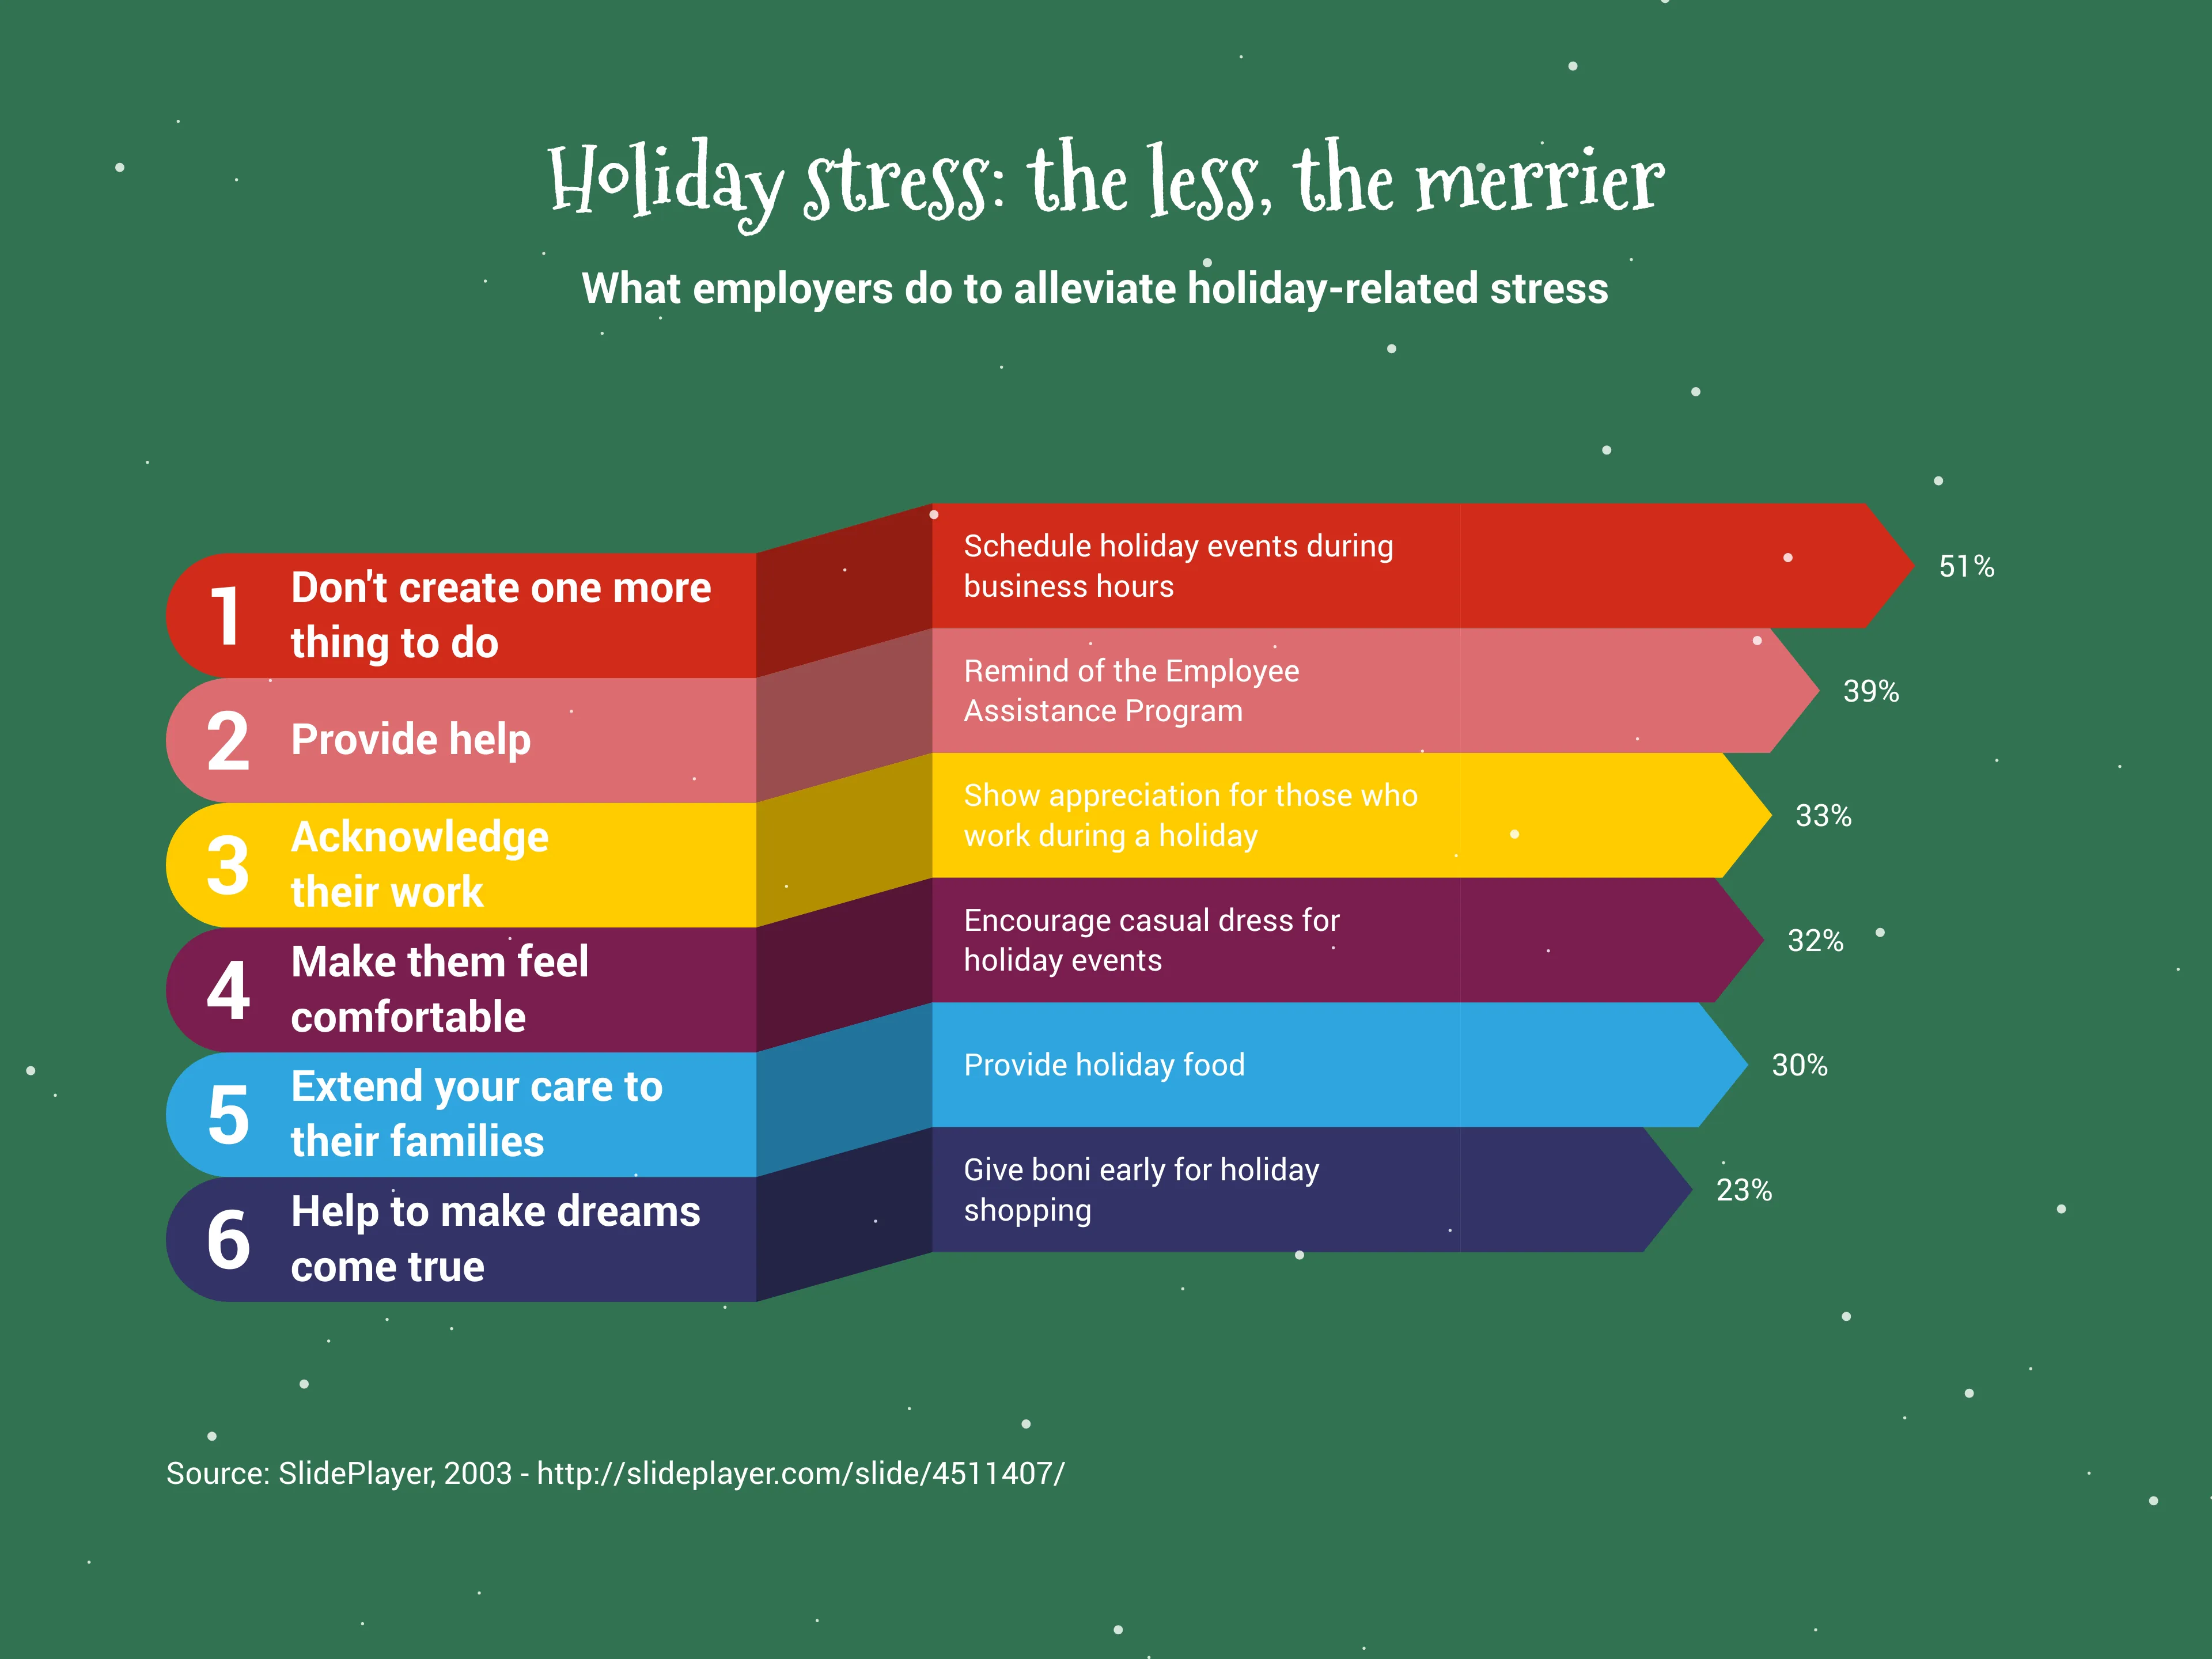 Holiday stress: the less, the merrier